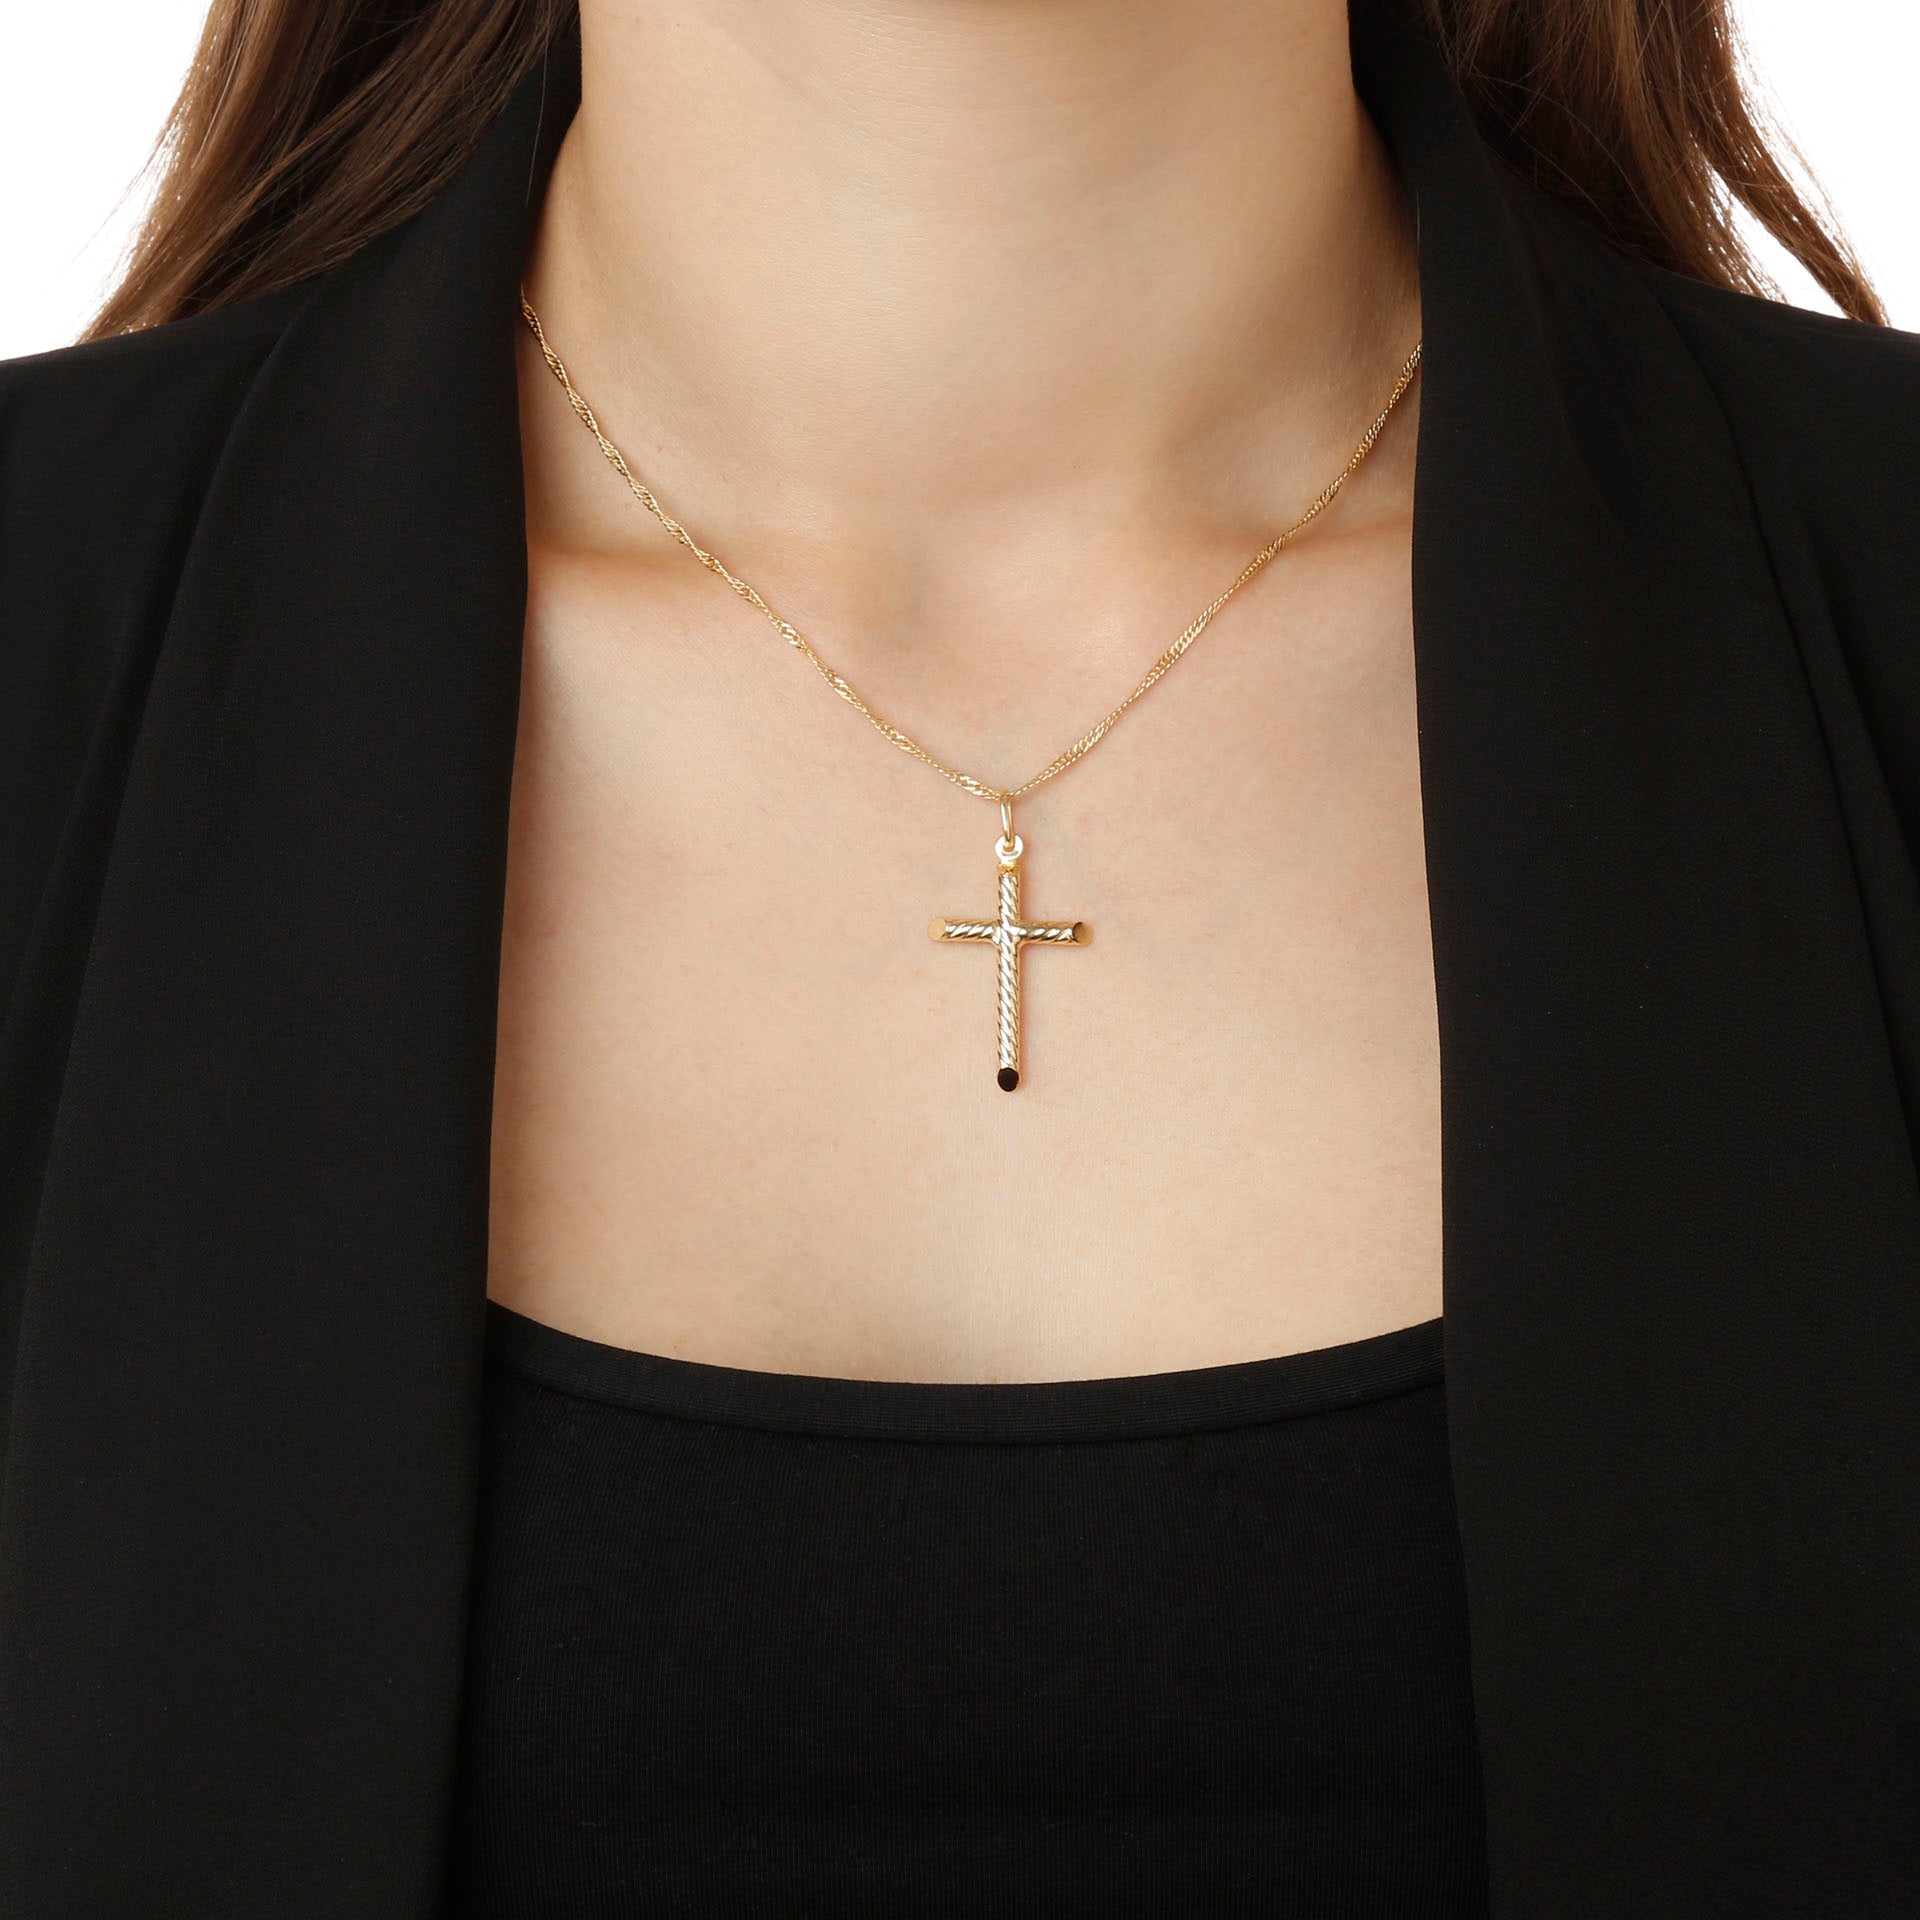 Buy 925 Sterling Silver & Amber Cross Pendant With Italian Sterling Silver  Necklace, Perfect Cross Jewellery Gift for Any Special Occasion Online in  India - Etsy